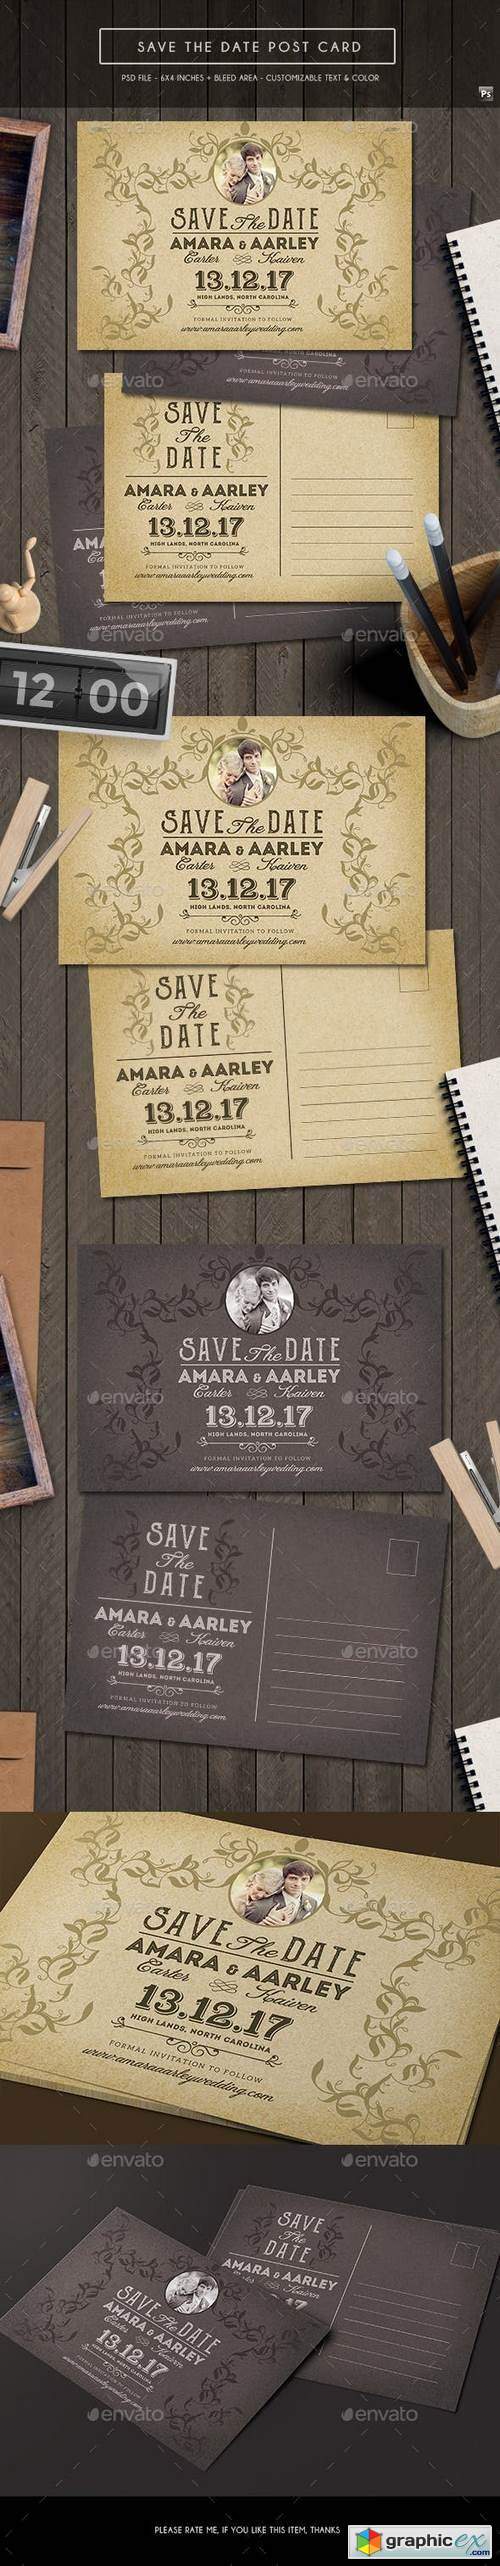 Vintage Save the Date Post Card